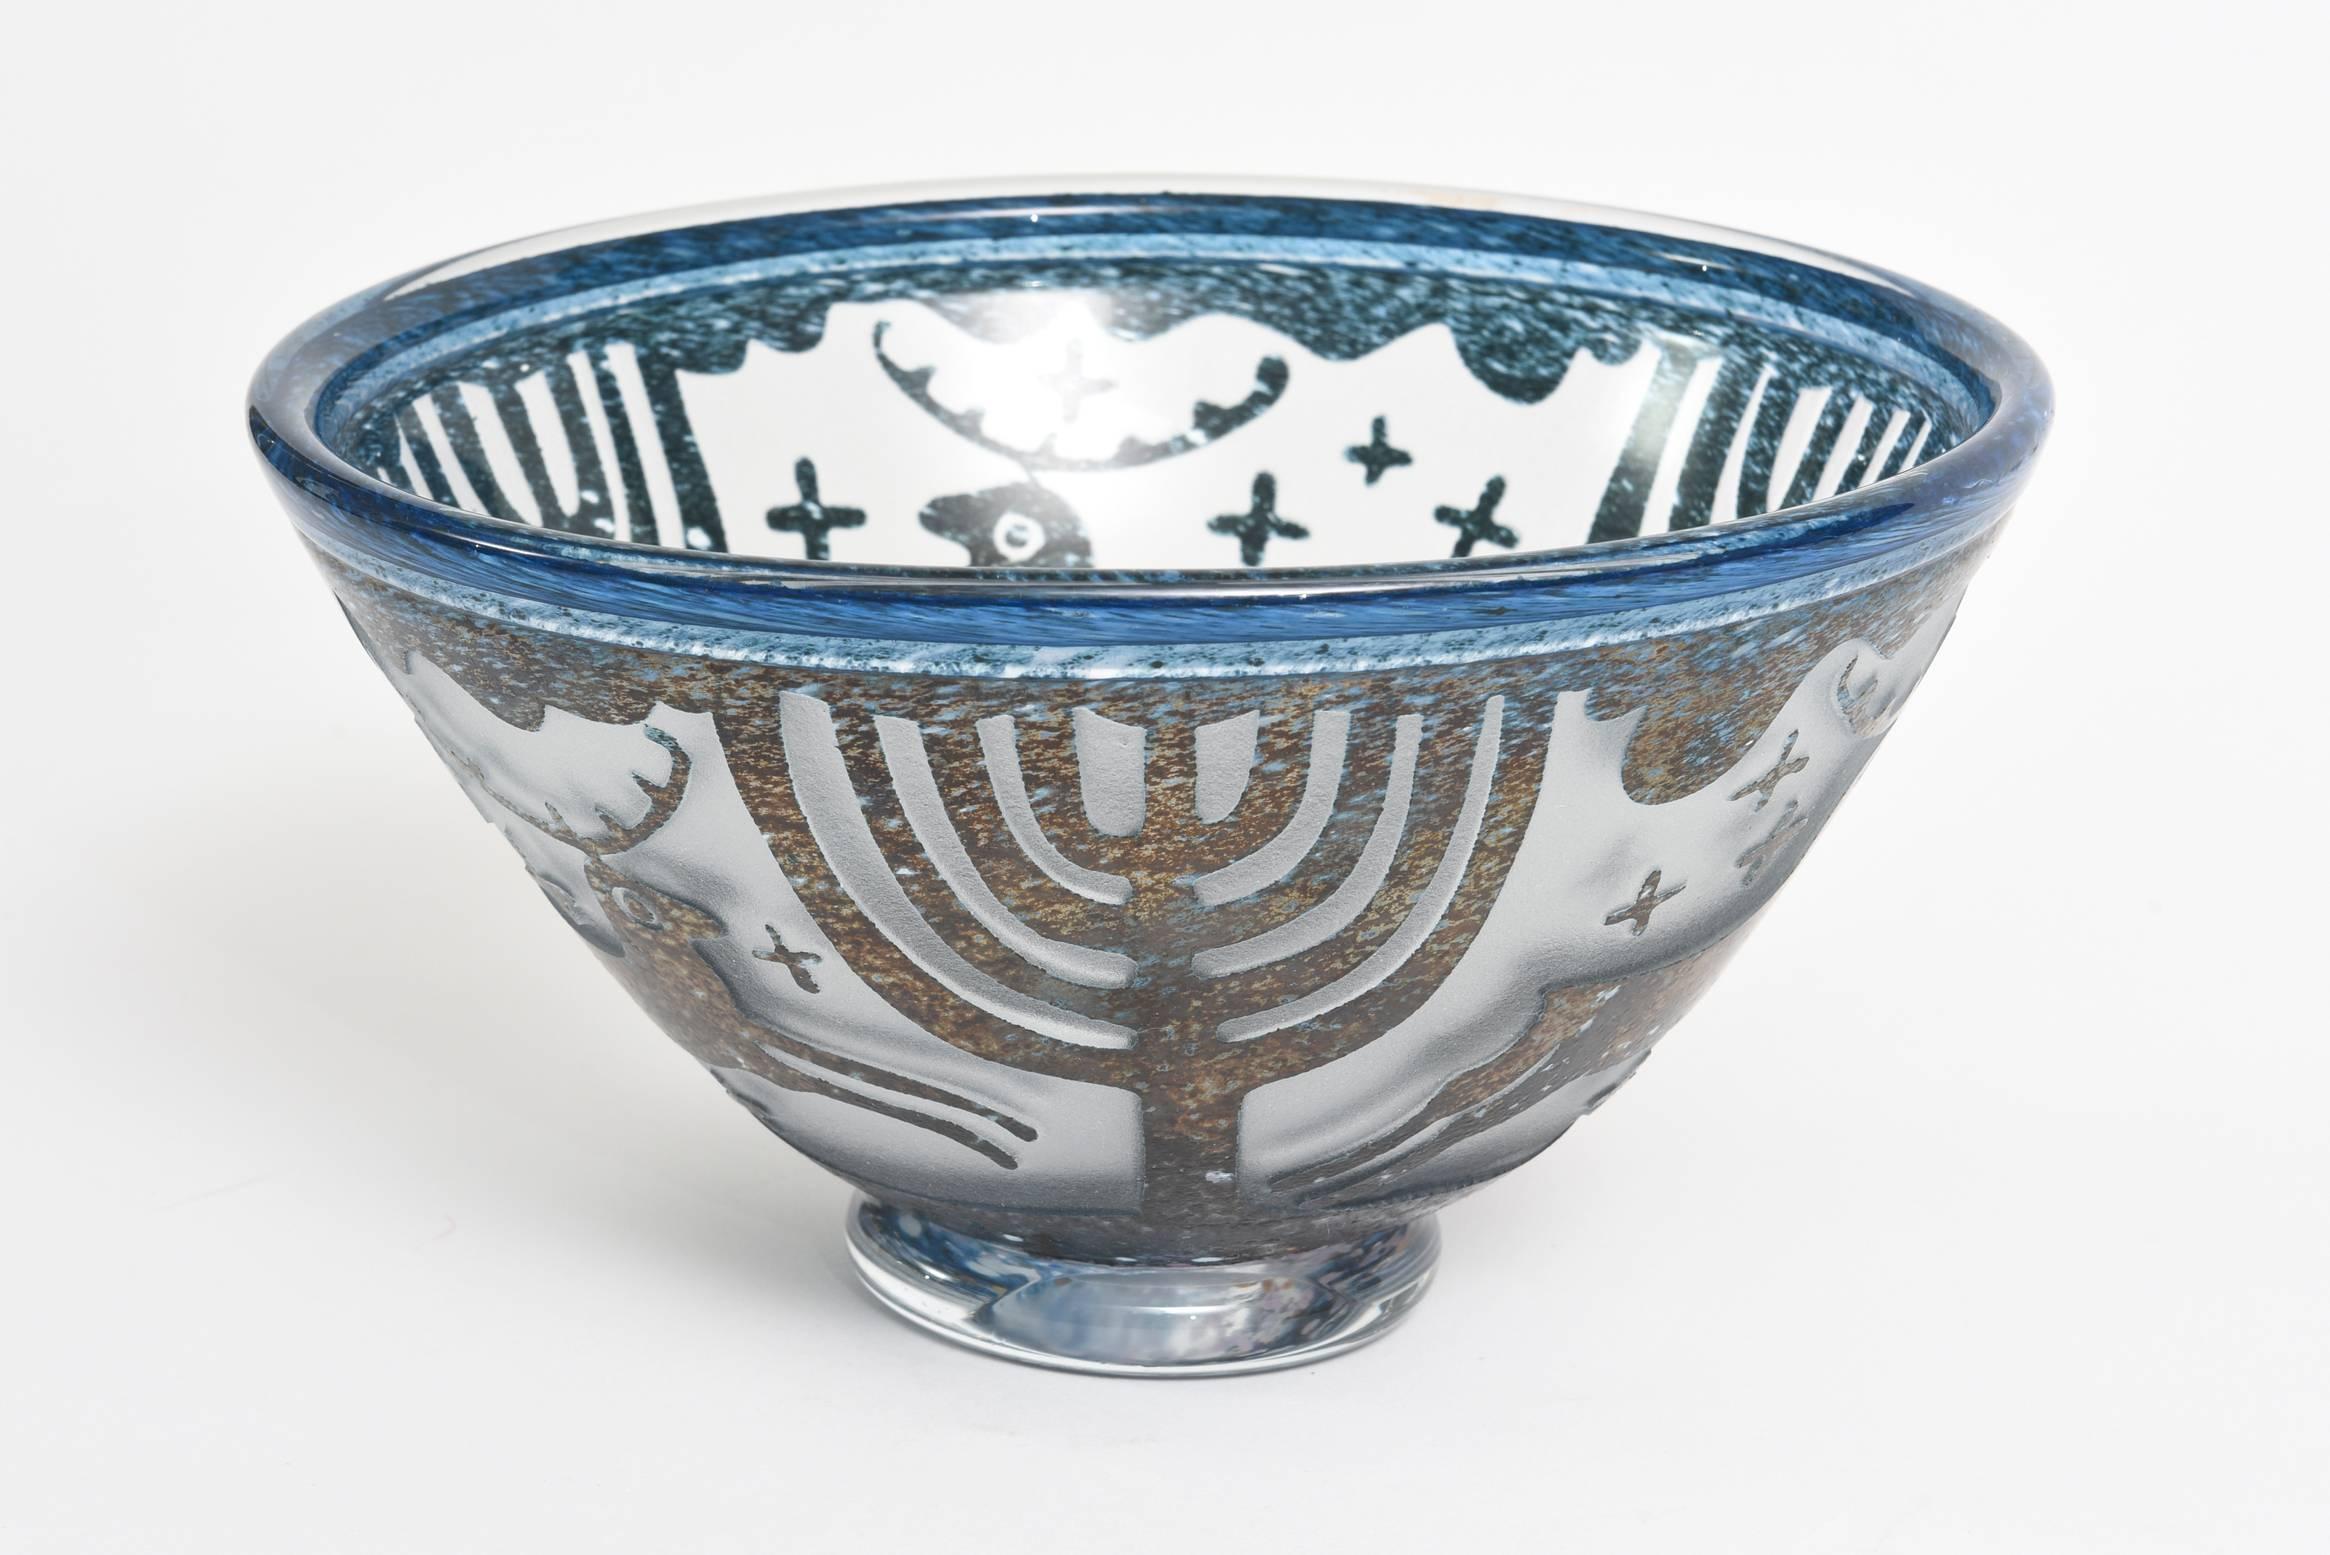 This Swedish Kosta Boda festive glass bowl that is signed Villien is by Ulrica Hydman-Vallienfrom the late 70's. It is textural and the design is raised with an incised intaglio etched process. It is like a relief.  The blues vary in tone and hue